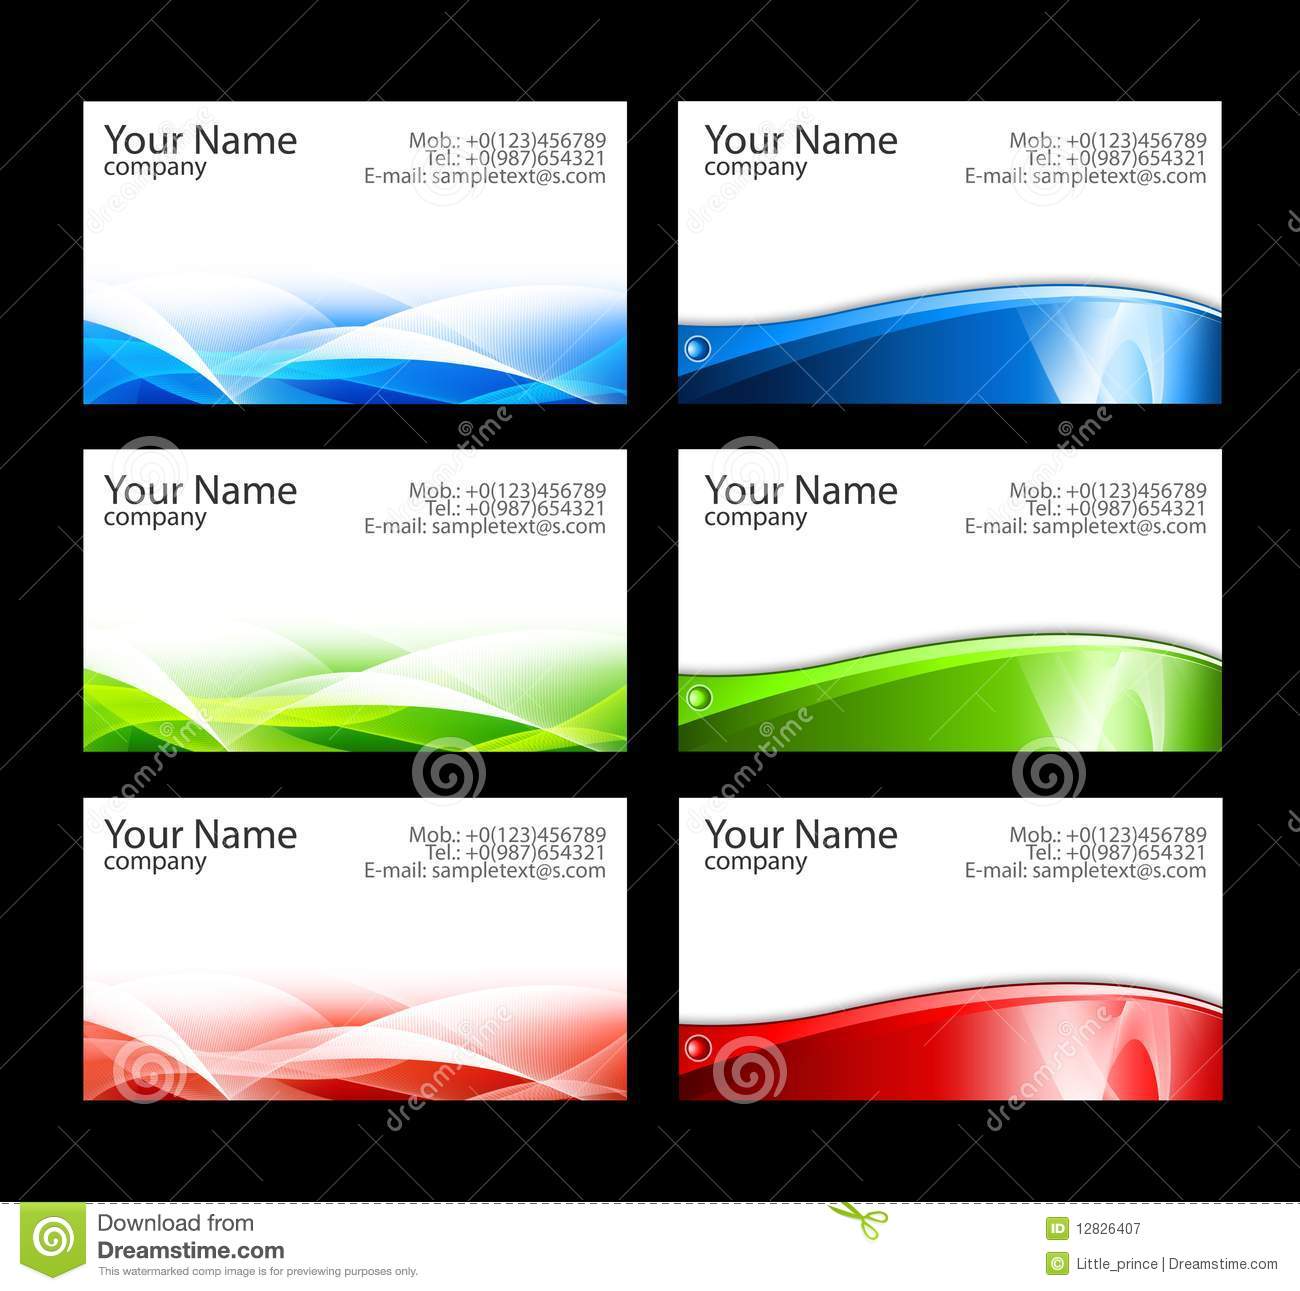 23 Avery Blank Business Card Templates Images - Avery Business Intended For Word 2013 Business Card Template